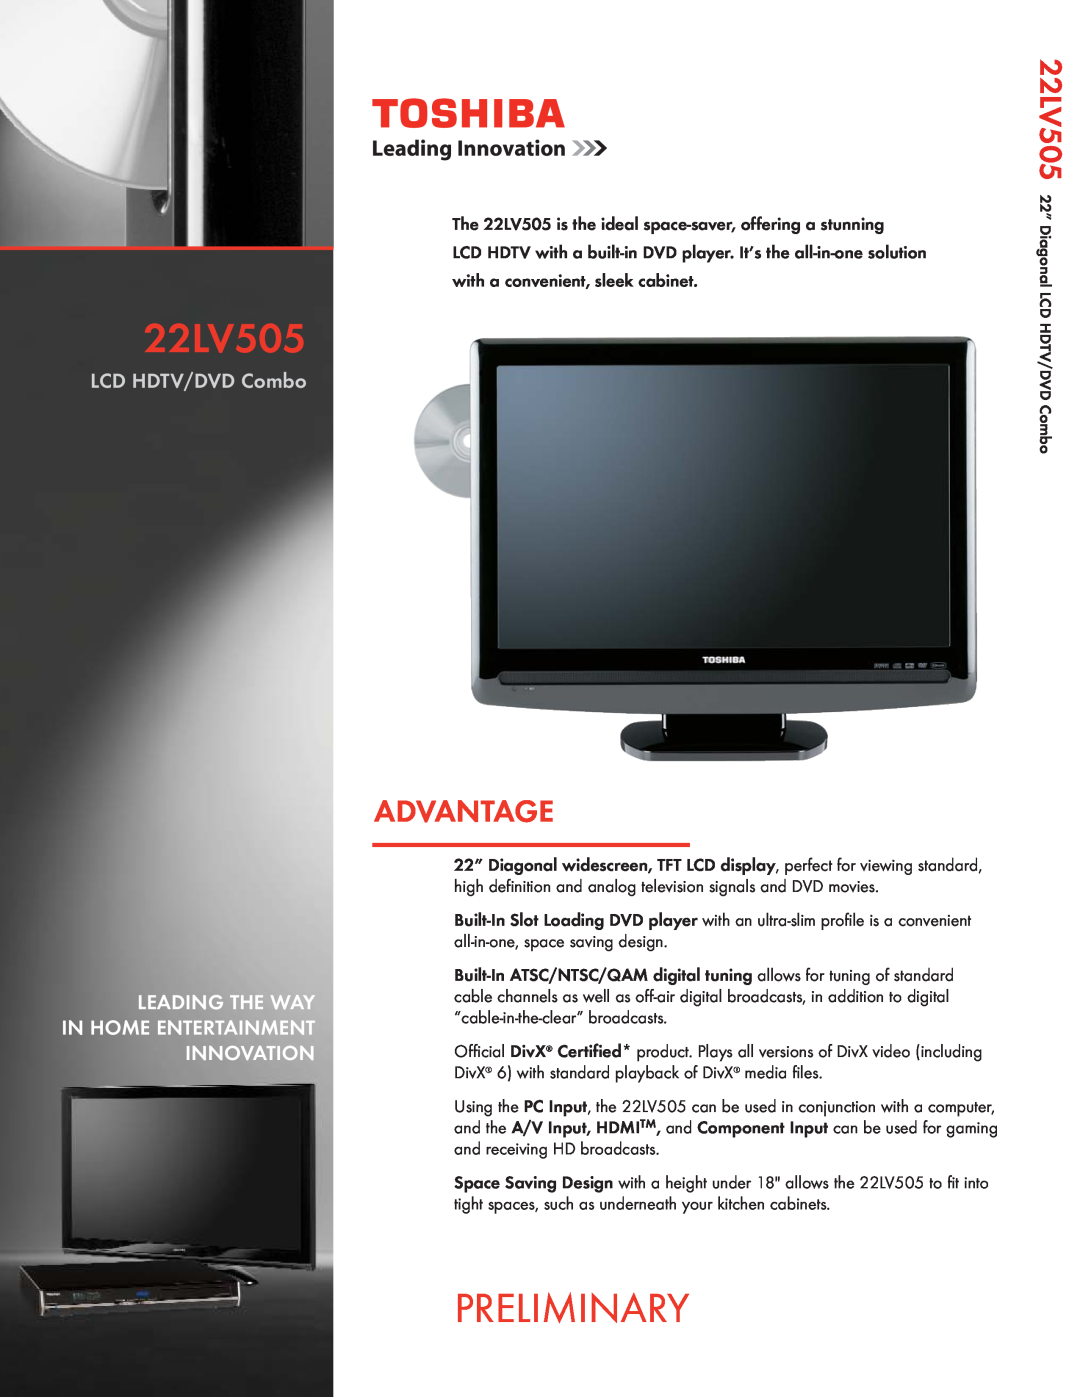 Toshiba 22LV505 manual Preliminary, Advantage, LCD HDTV/DVD Combo, Leading The Way In Home Entertainment Innovation 